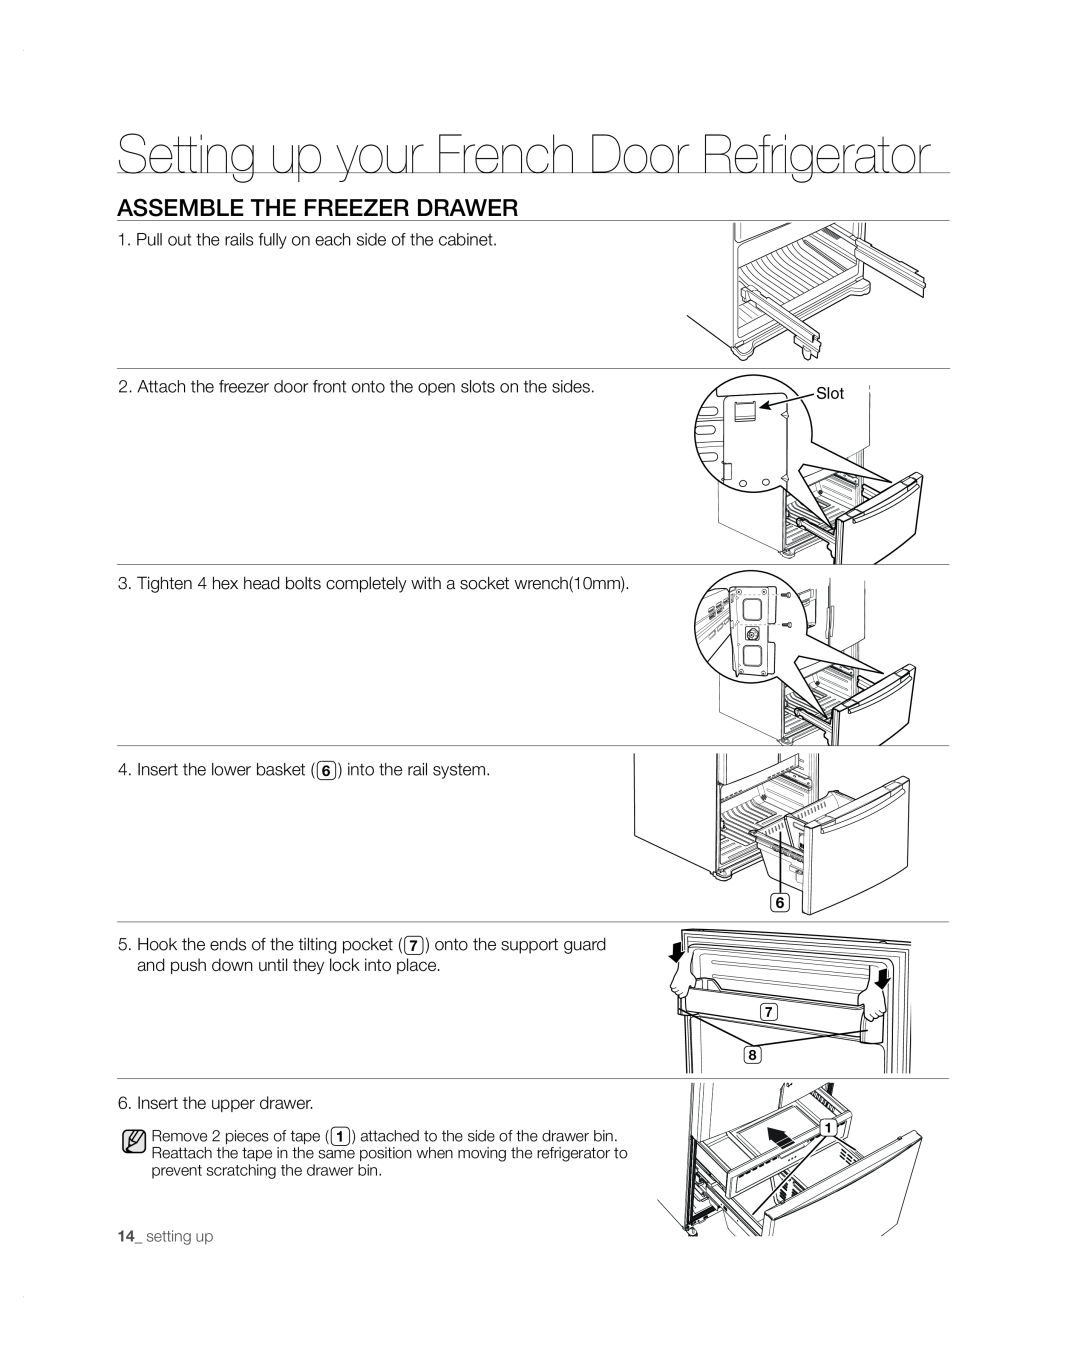 Samsung RFG297AARS/XAA user manual assemble the freezer drawer, Setting up your French Door Refrigerator 